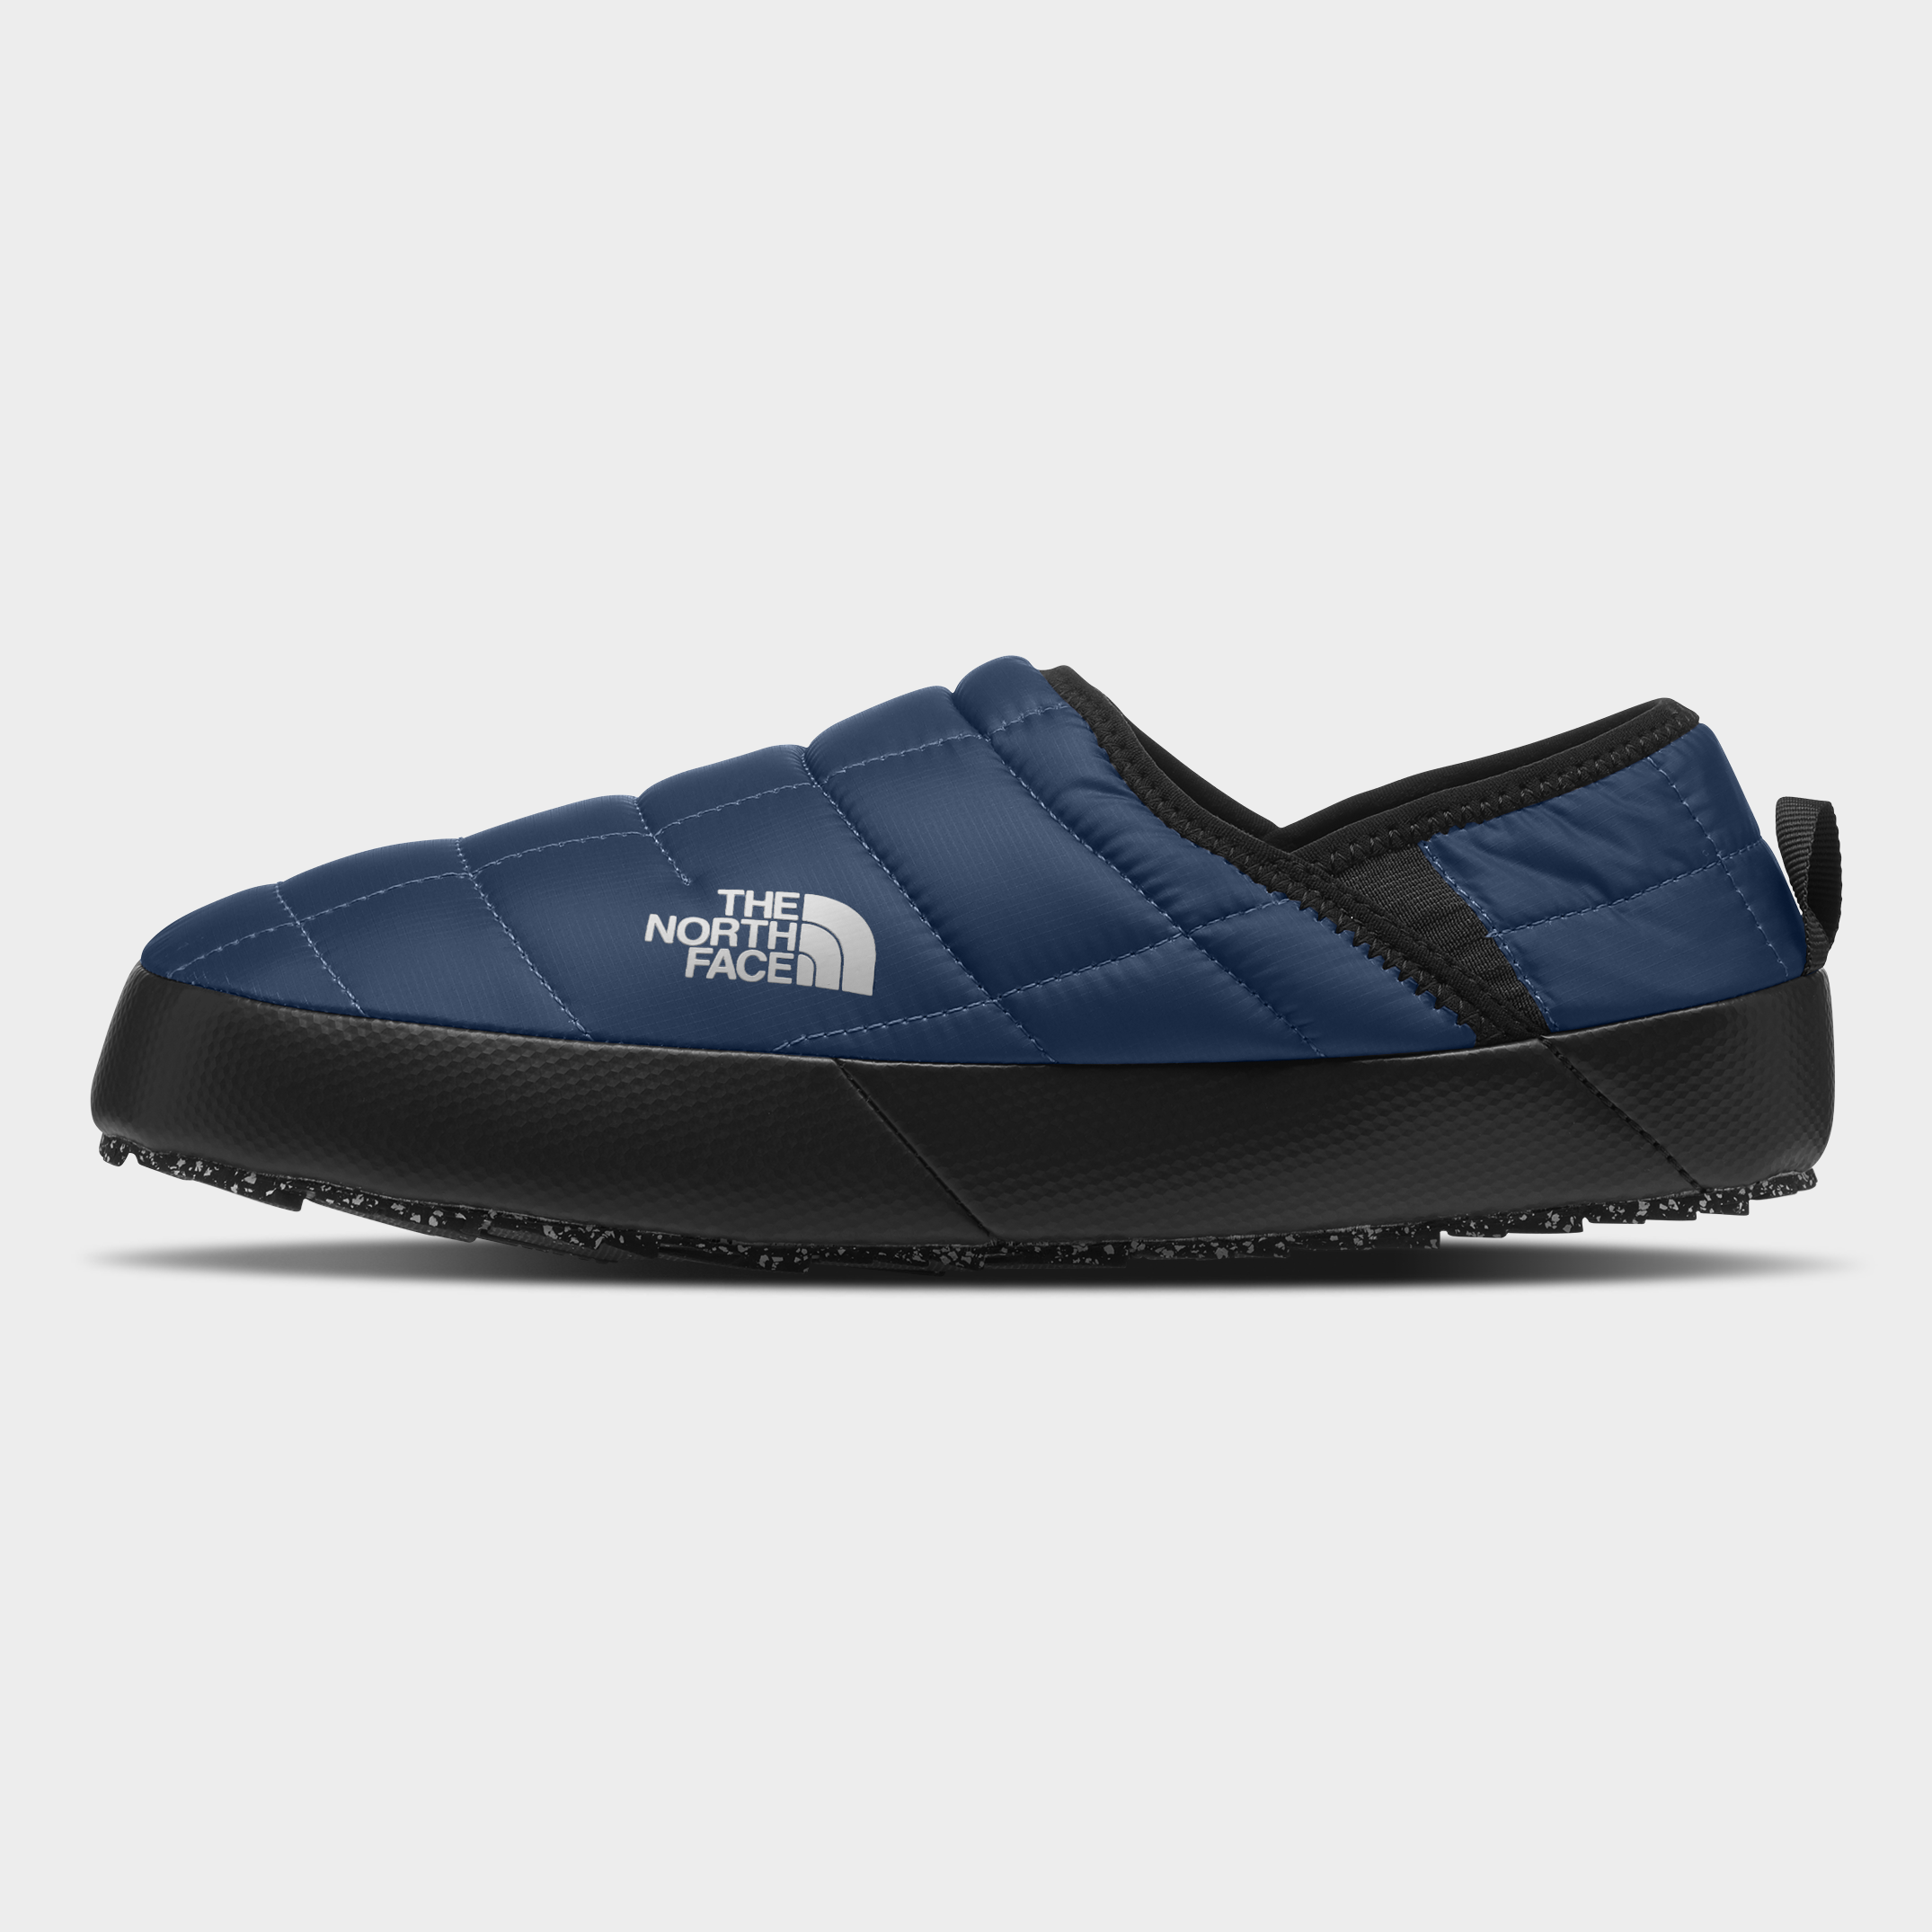 TNF THERMOBALL TRACTION MULE